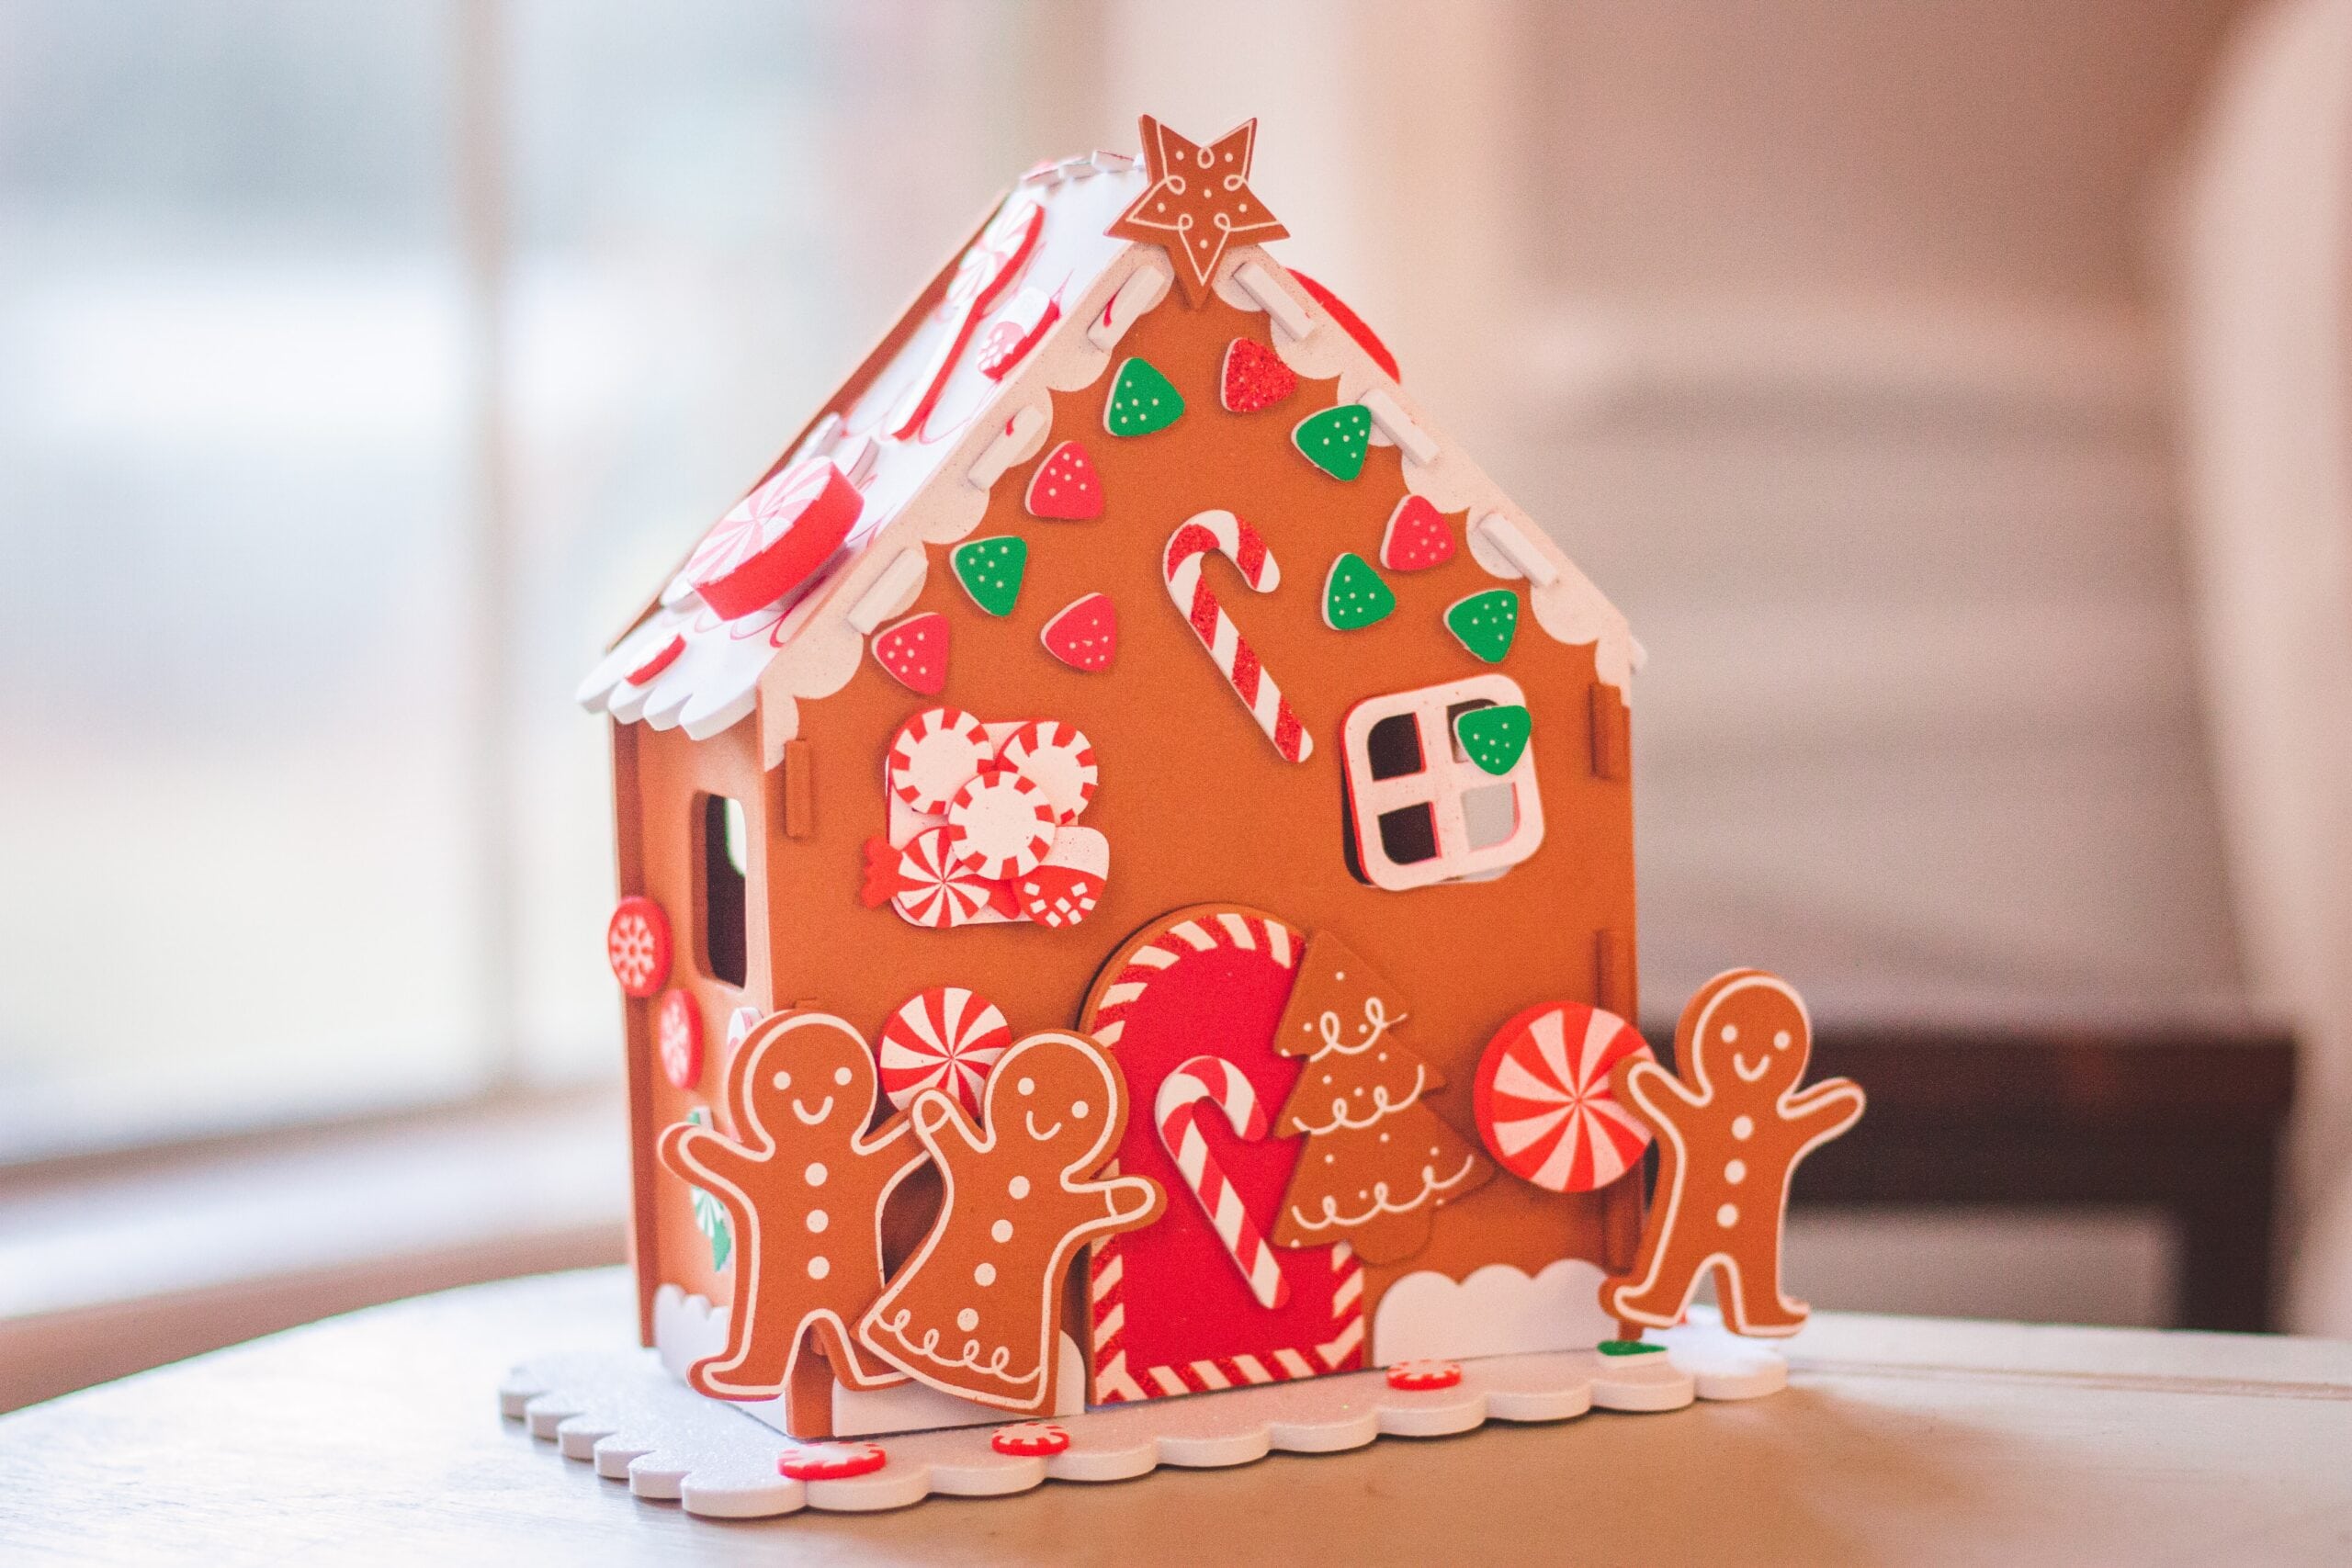 4.    Gingerbread houses were inspired by which fairy tale?